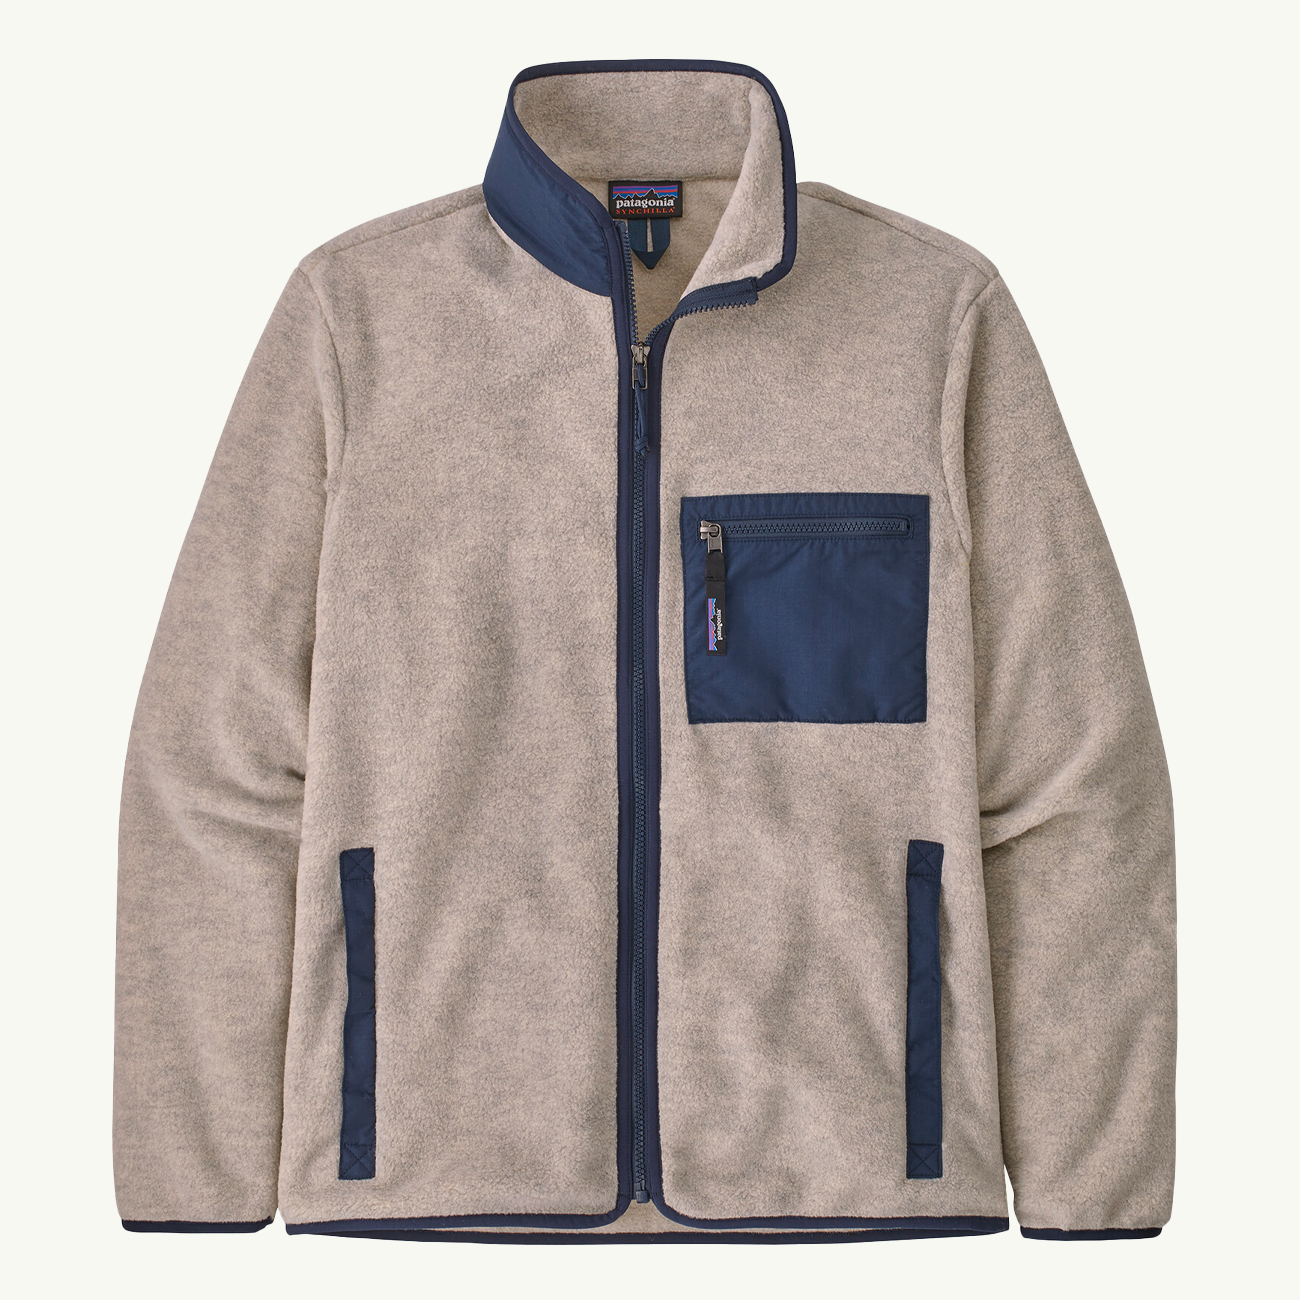 Synch Jacket - Oatmeal Heather